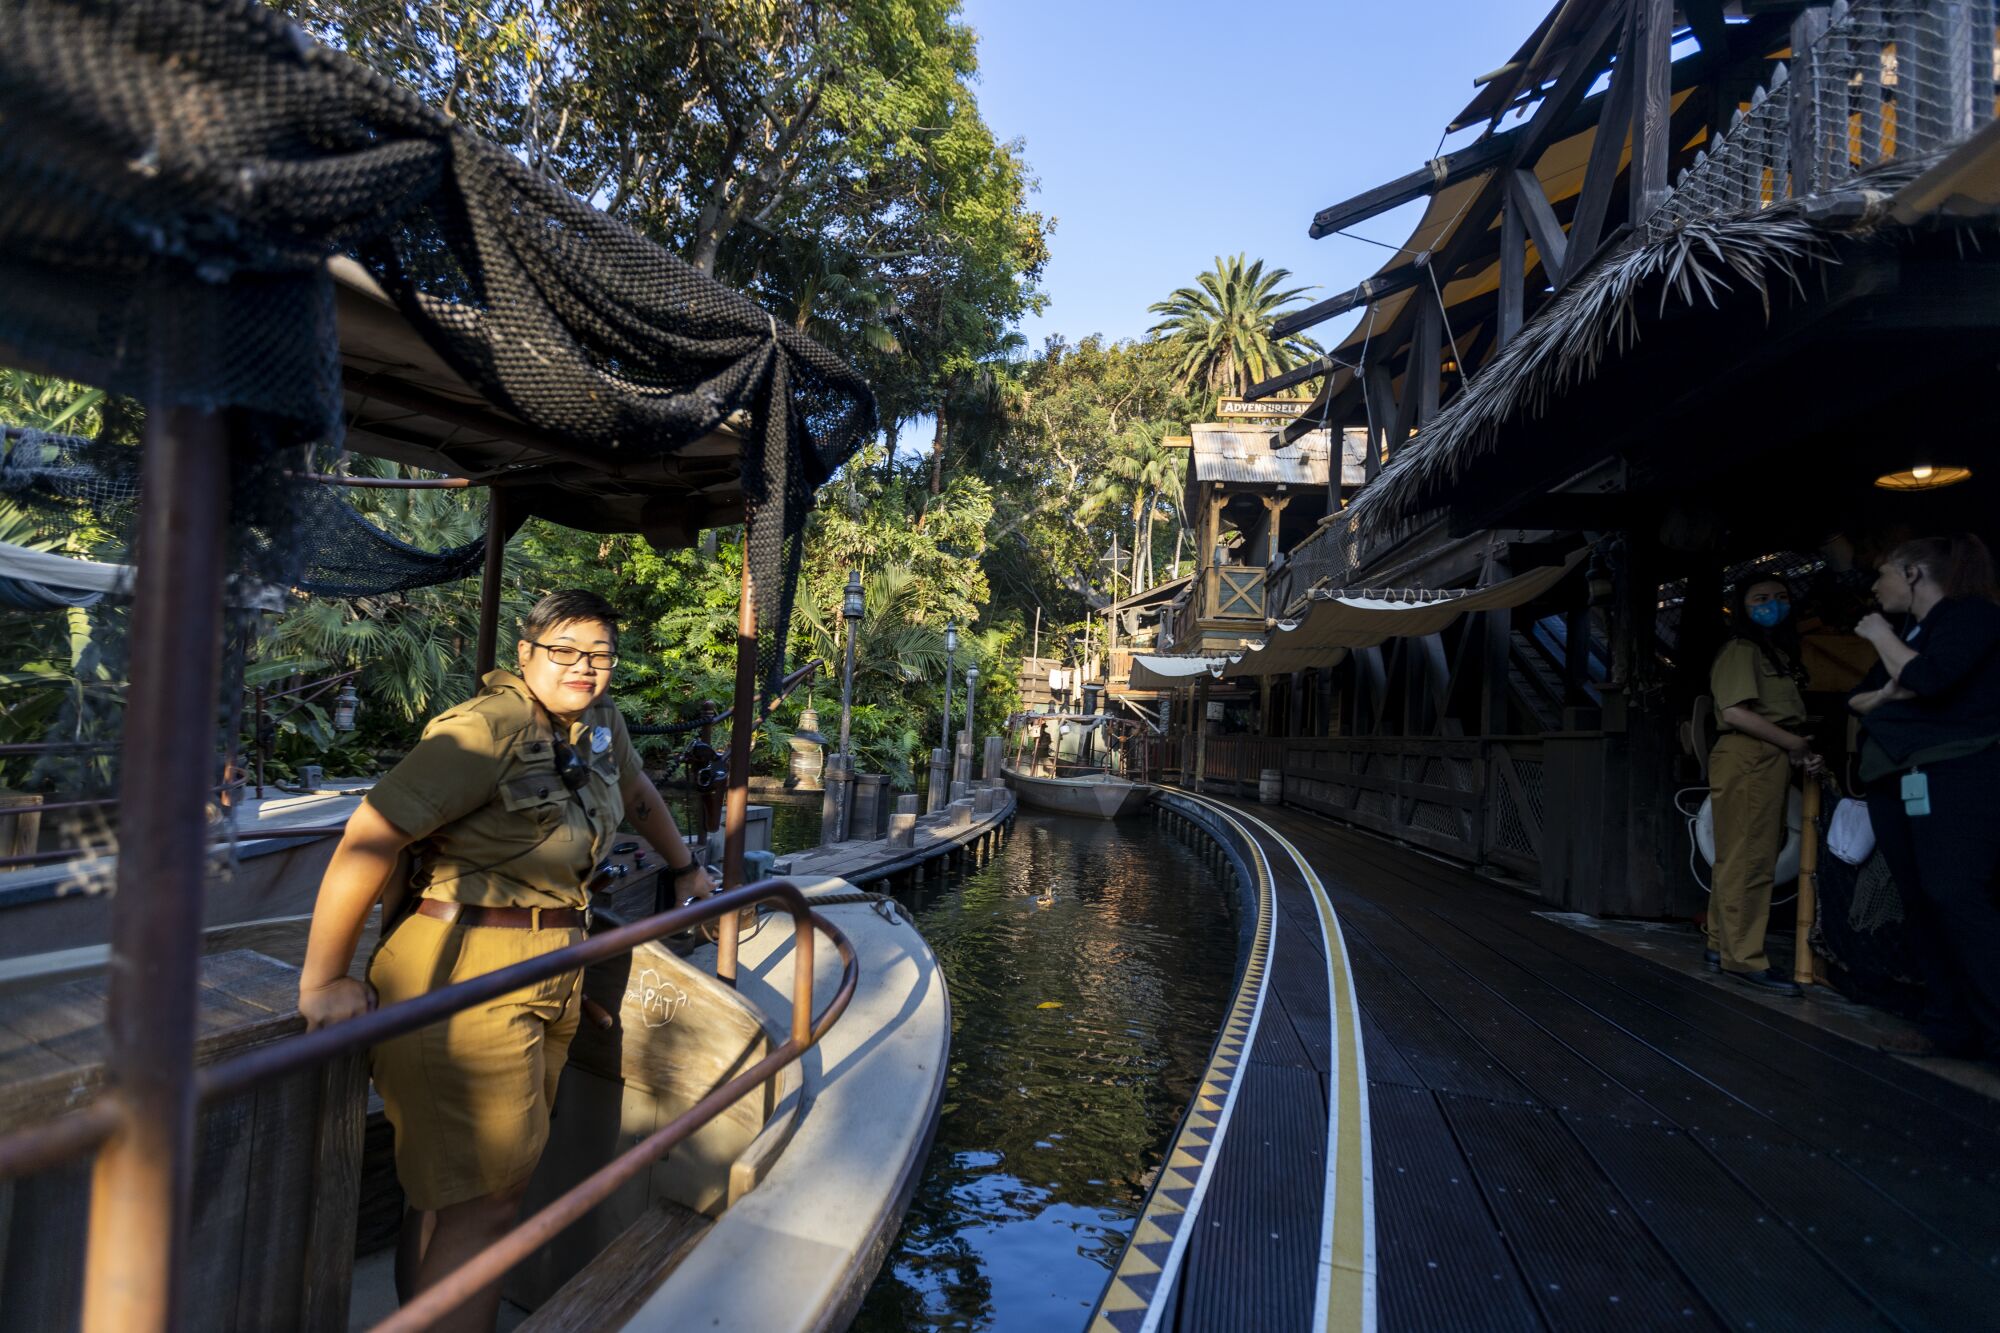 Skipper Amanda Beth Lorenzo stands in the Jungle Cruise boat at the entrance to the ride